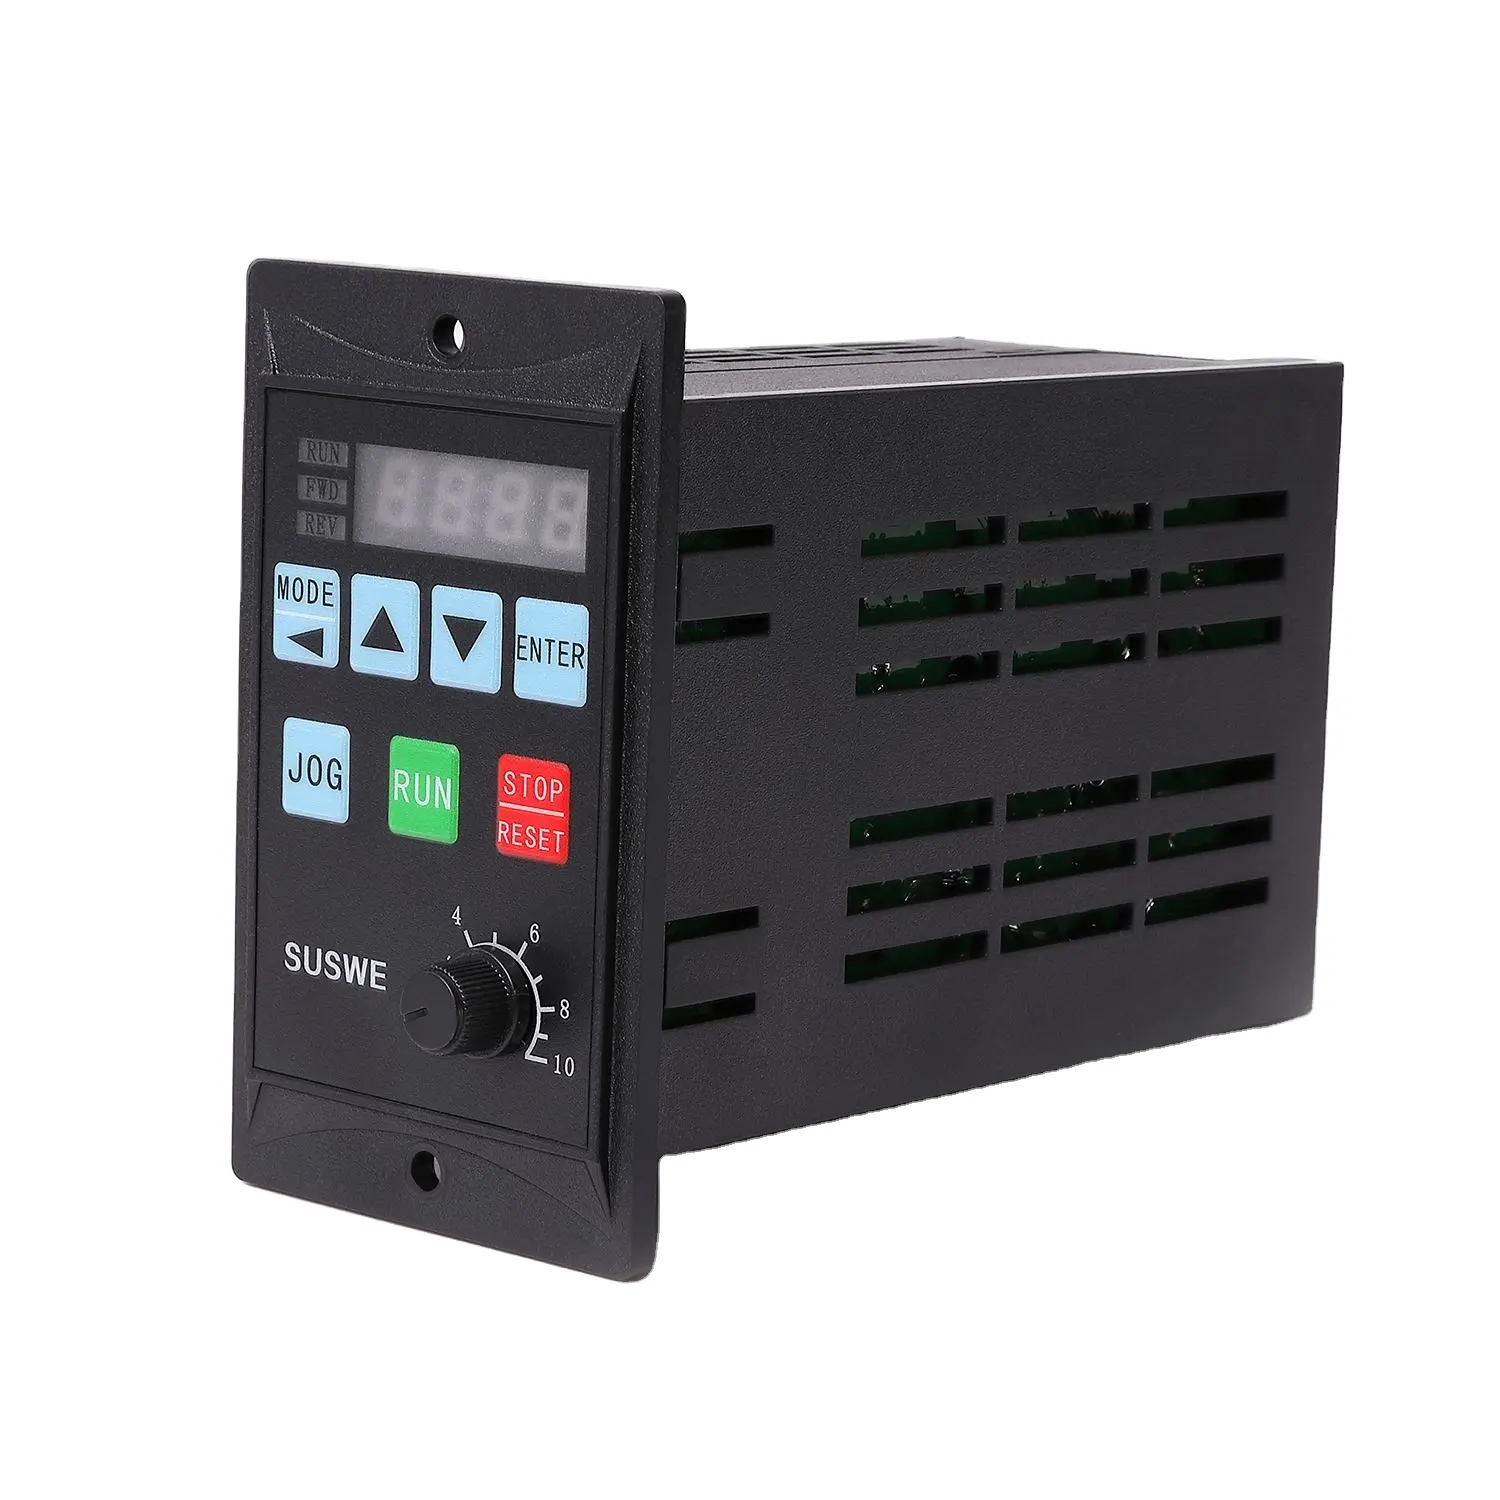 750W RS485 Frequency Converter with MCU Motor Driver and Single-Phase Input.